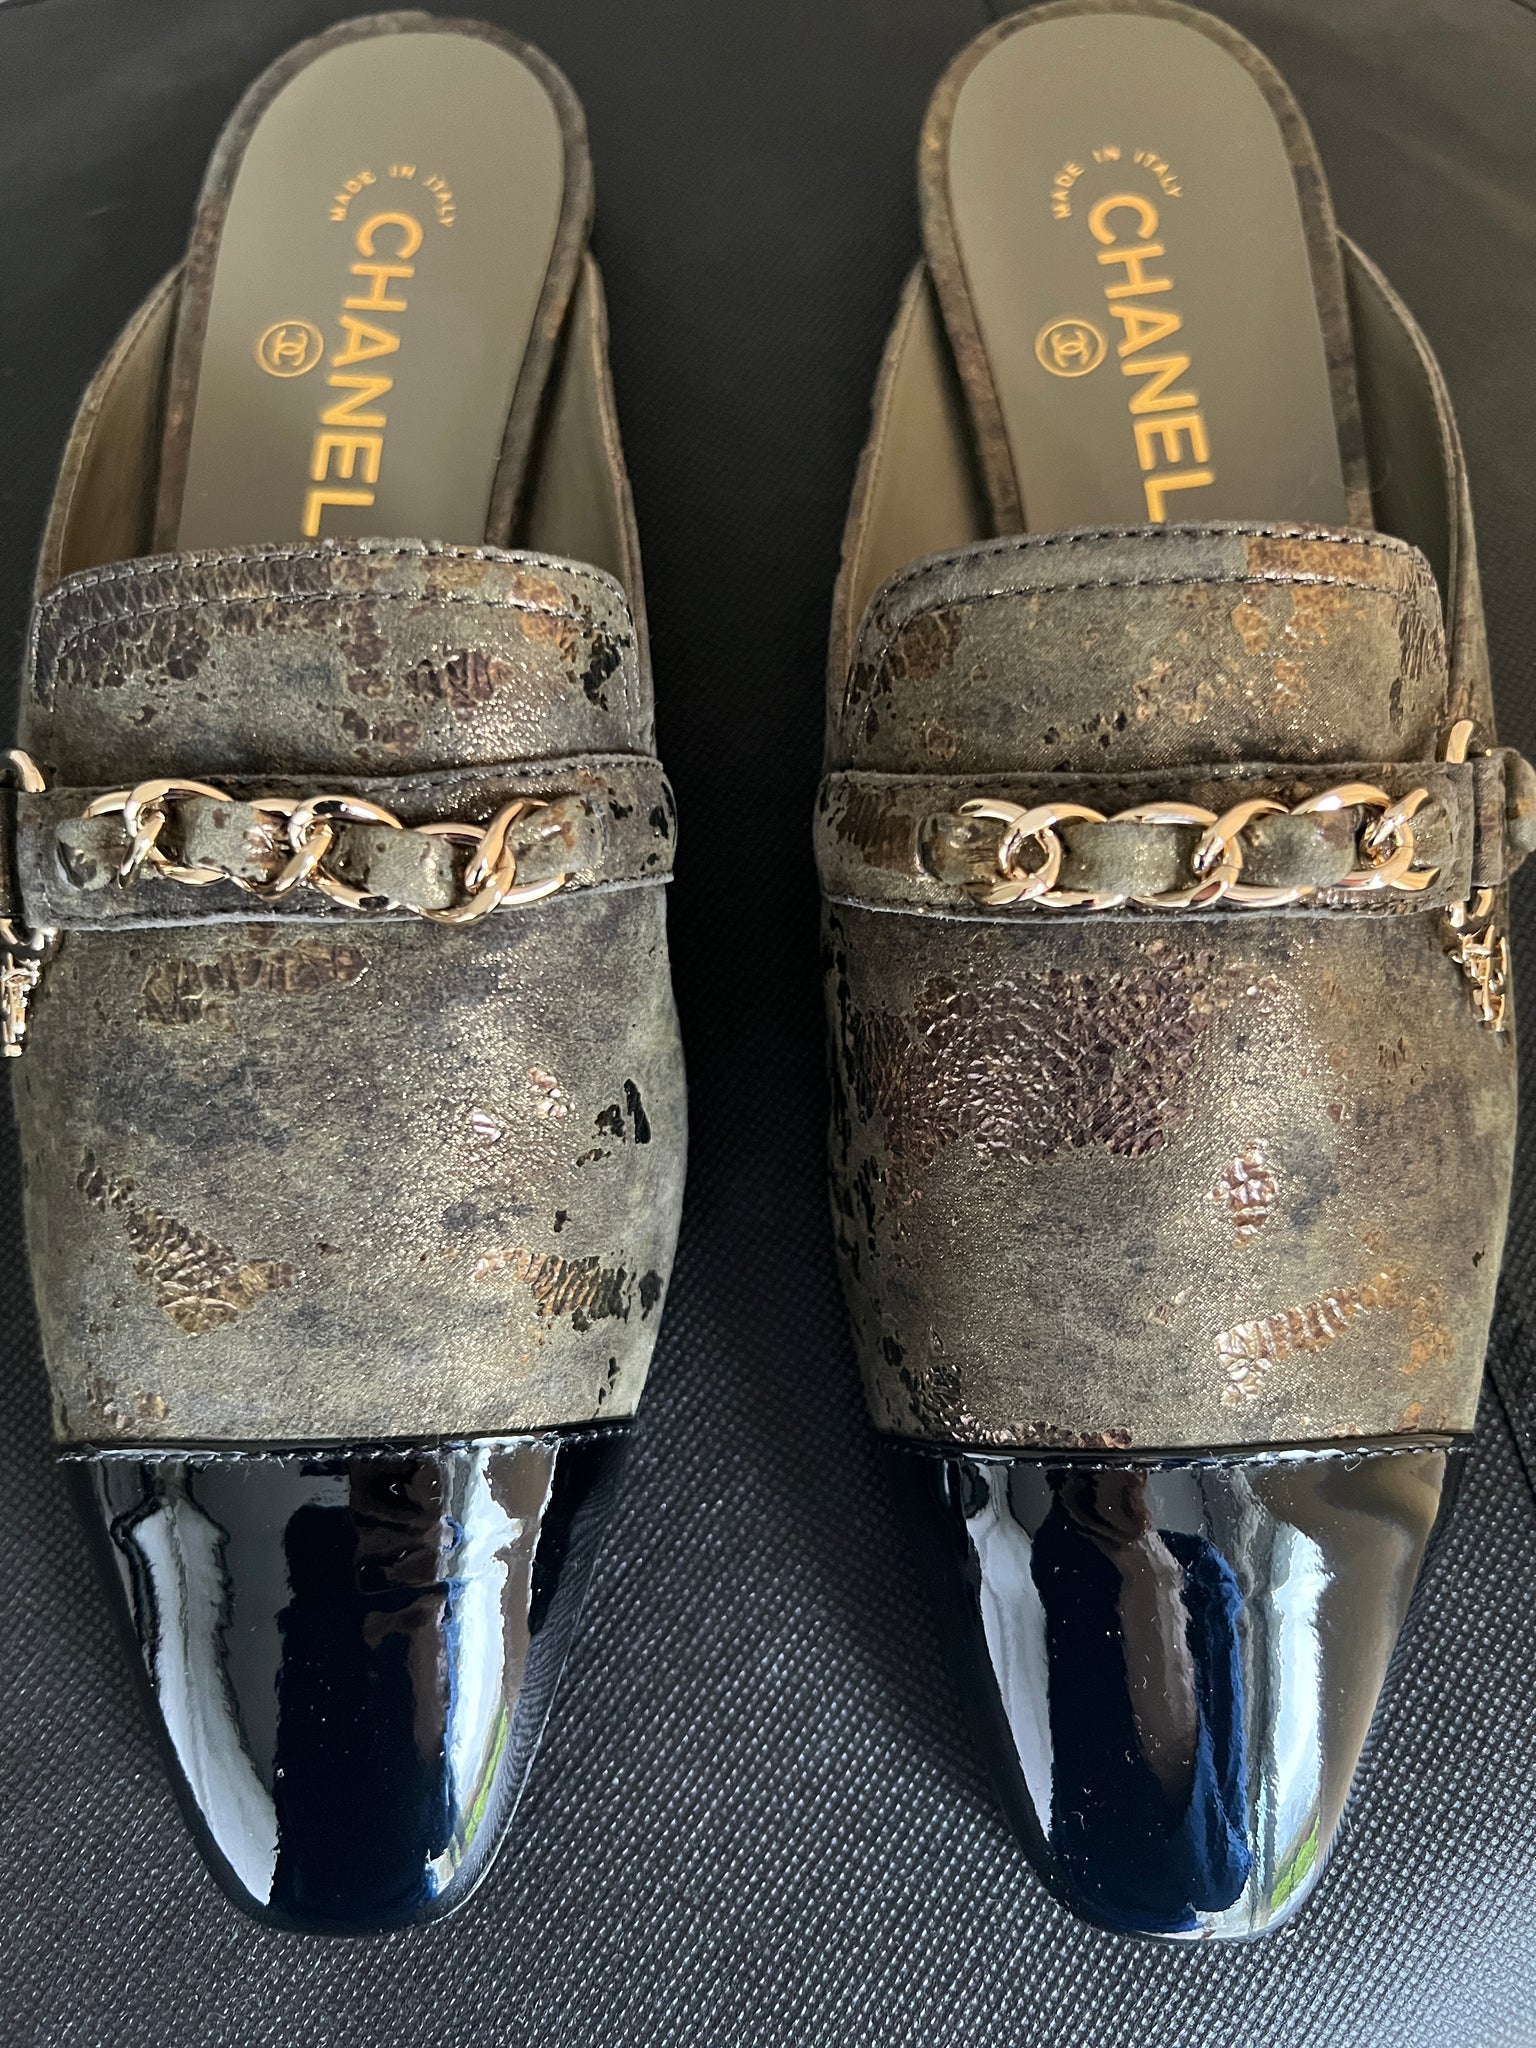 CHANEL, Shoes, Chanel Fur Mules New Never Worn